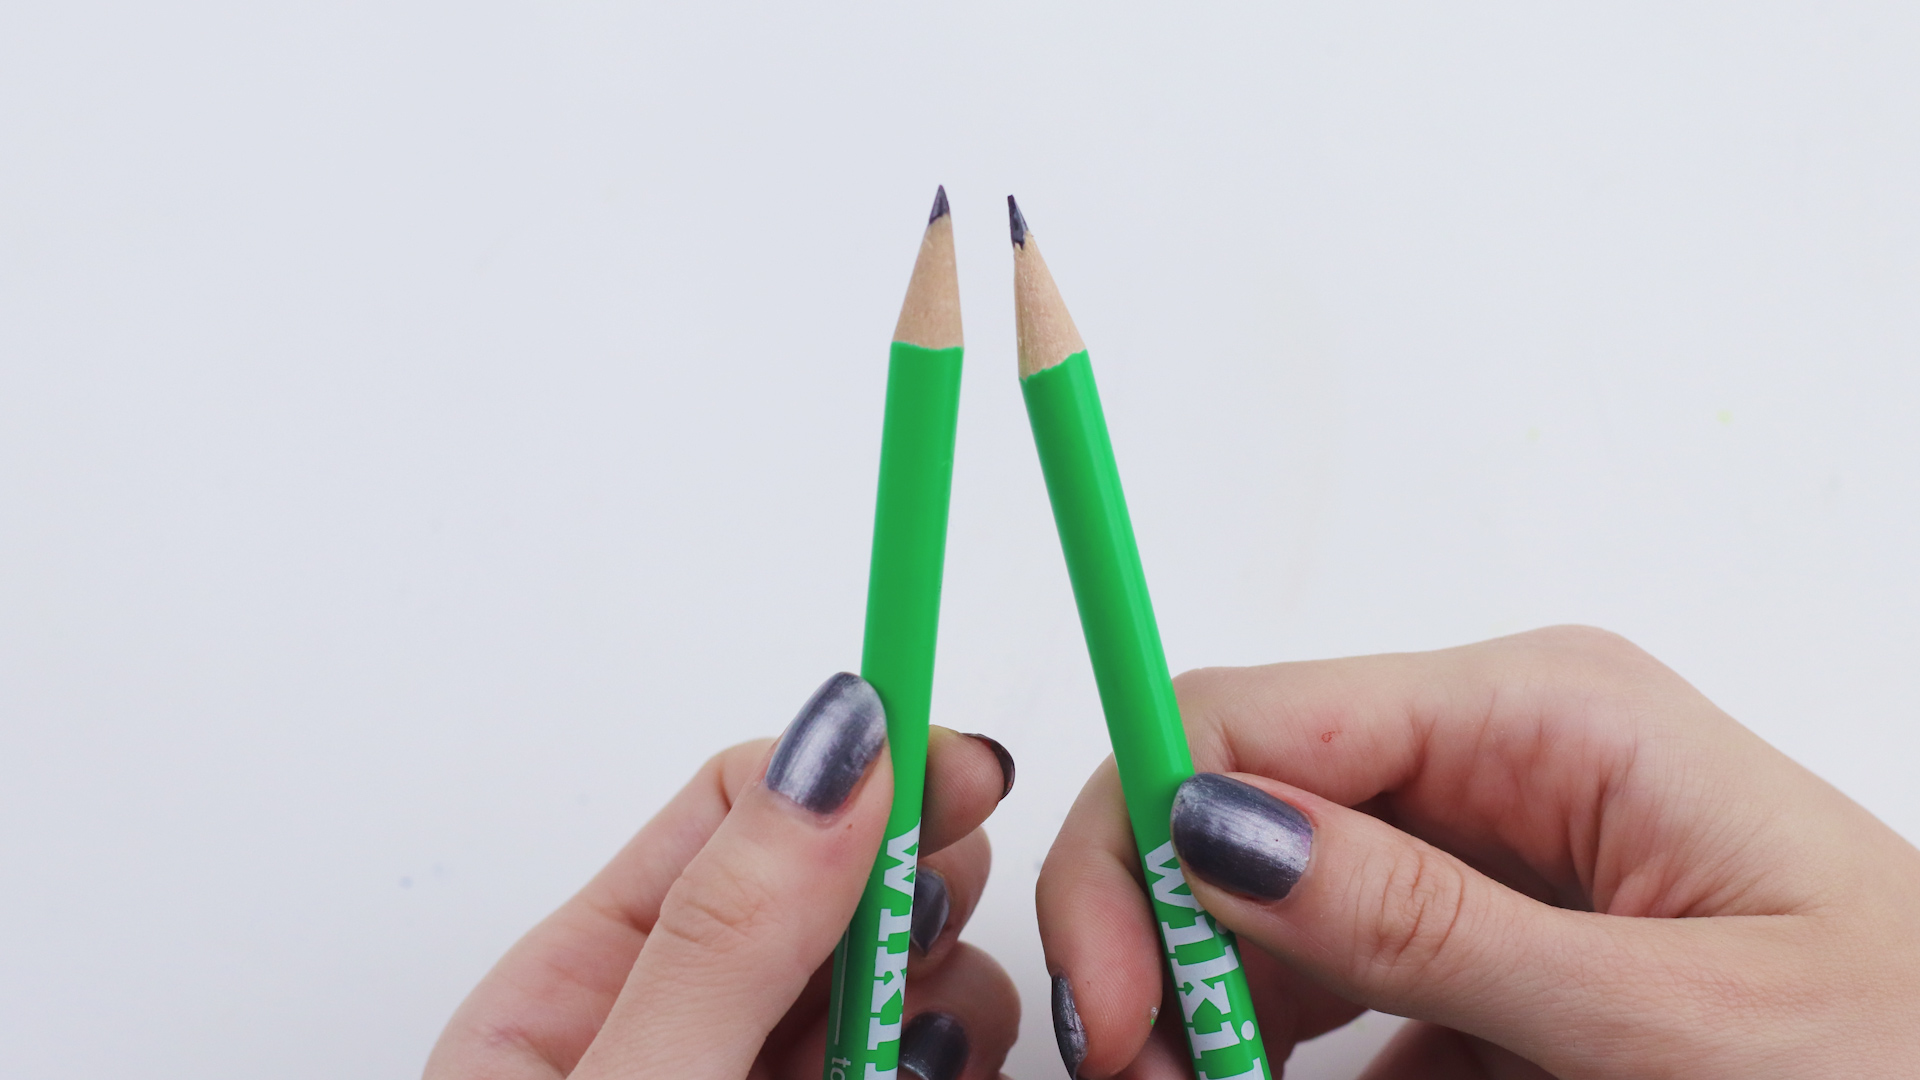 3 Ways to Sharpen a Pencil - wikiHow